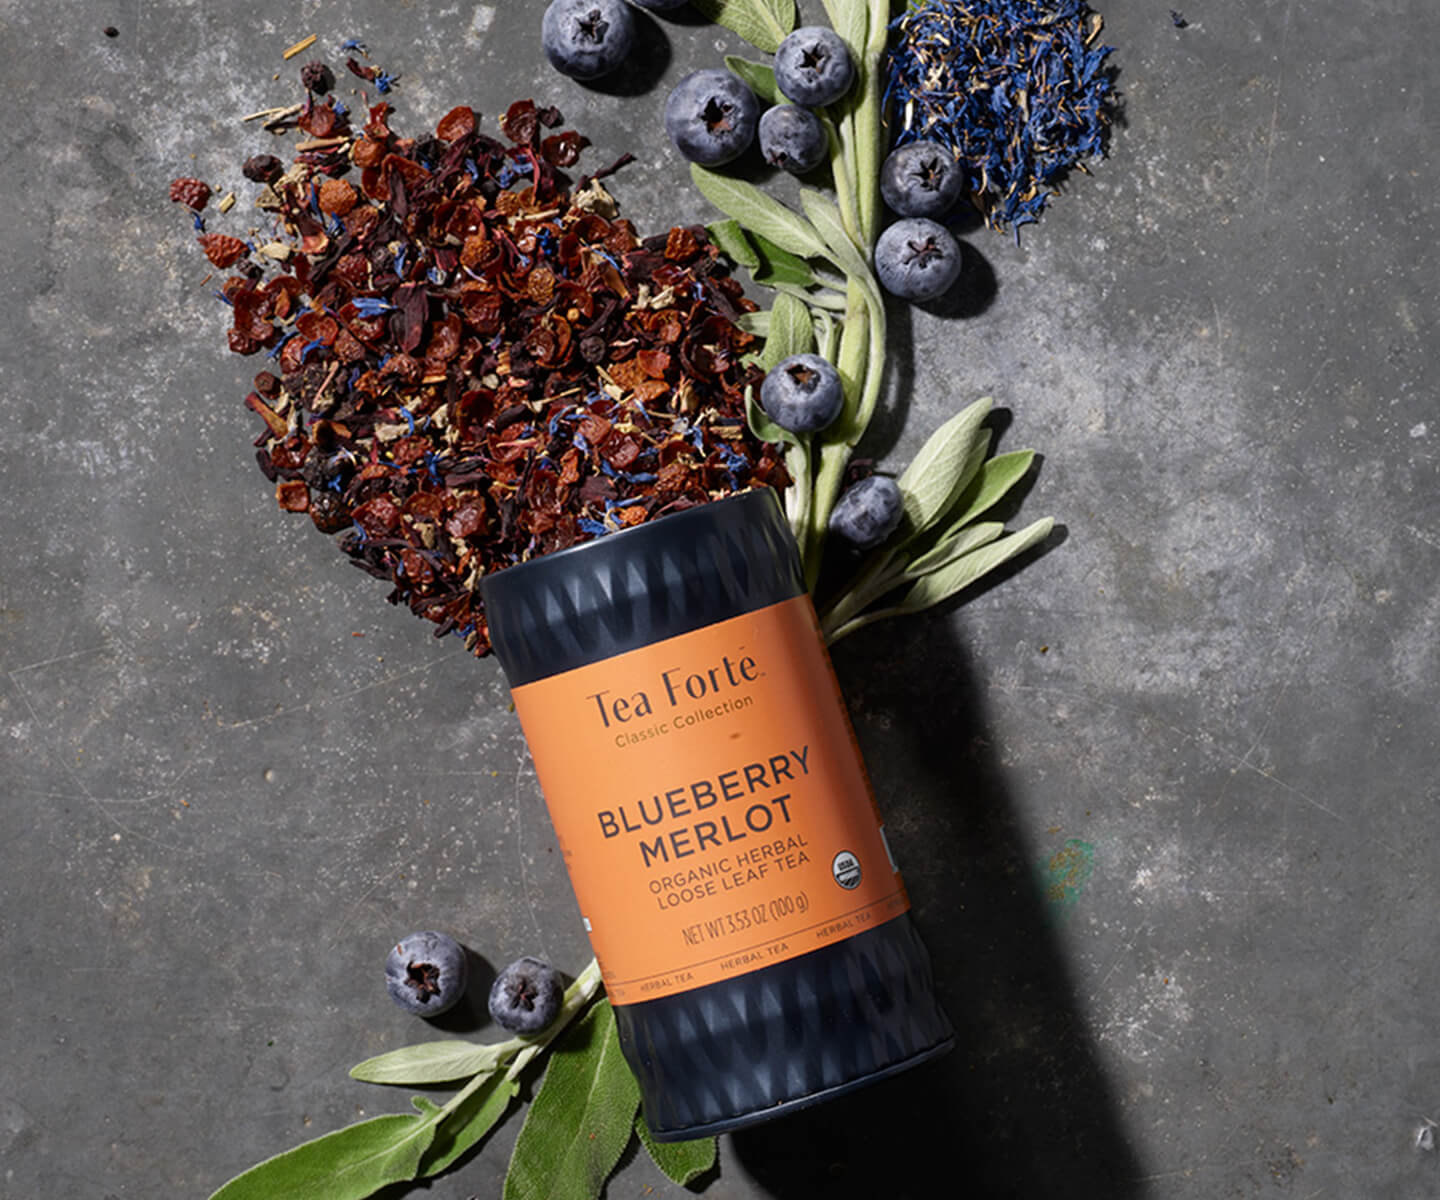 Blueberry Merlot Tea Canister laid back on dark stone with ingredients spilling out